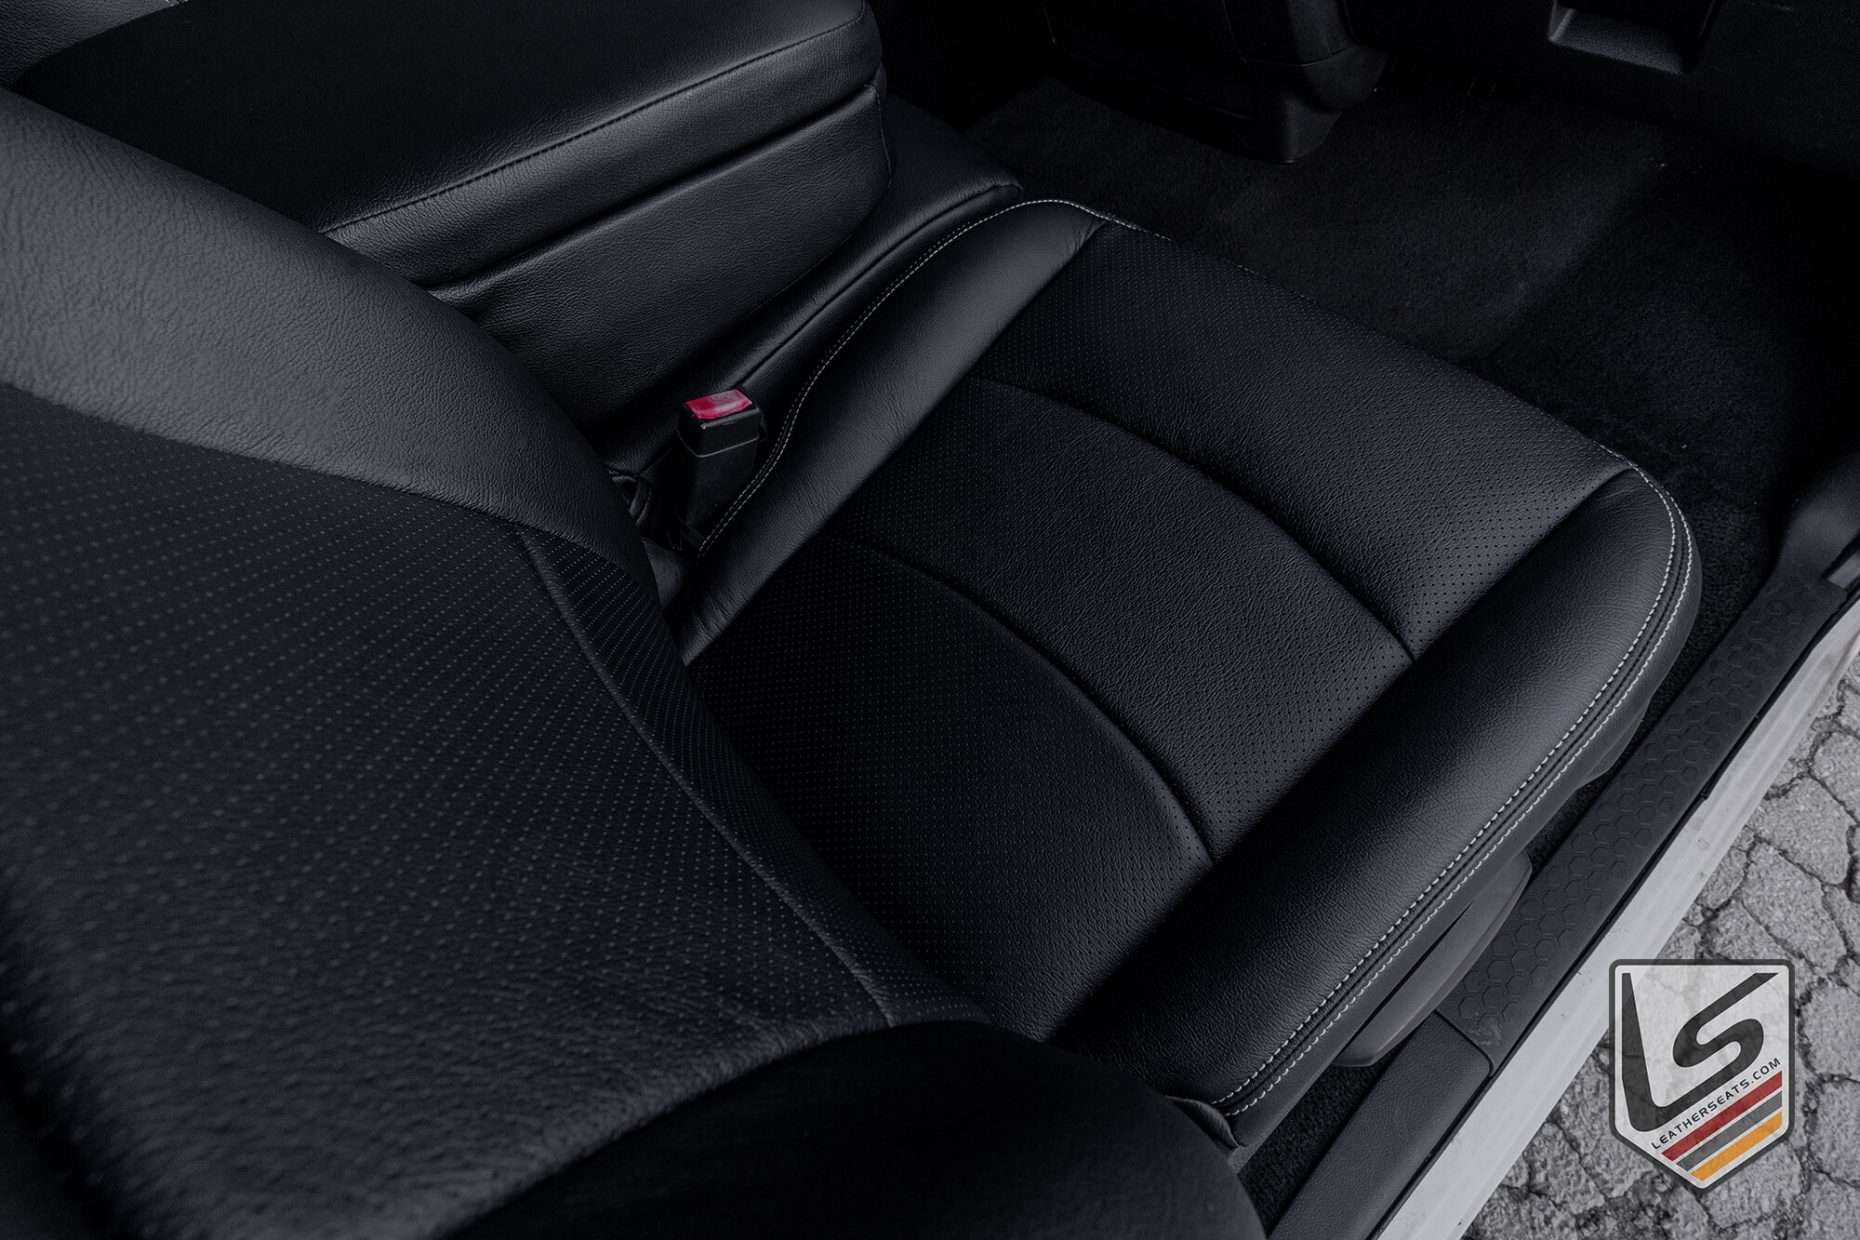 Top-down view of perforated backrest and seat cushion on Dodge Ram Regular Cab